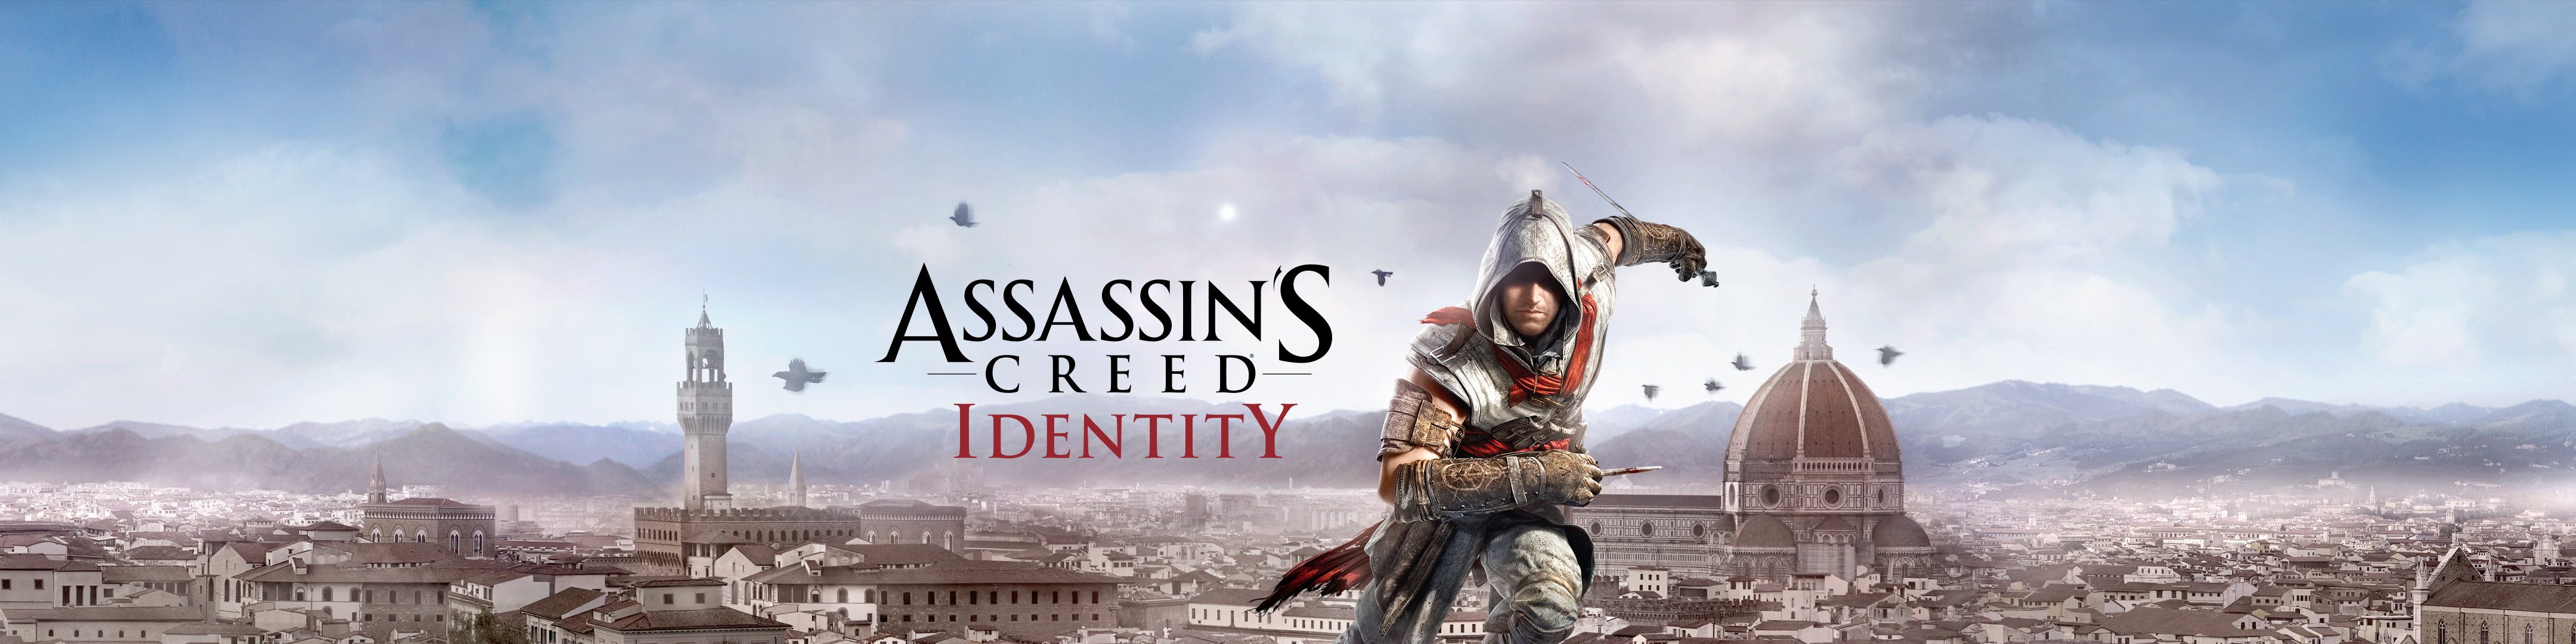 Assassin S Creed Identity Overview Apple App Store Us - assassin dual wield roblox code play now roblox games